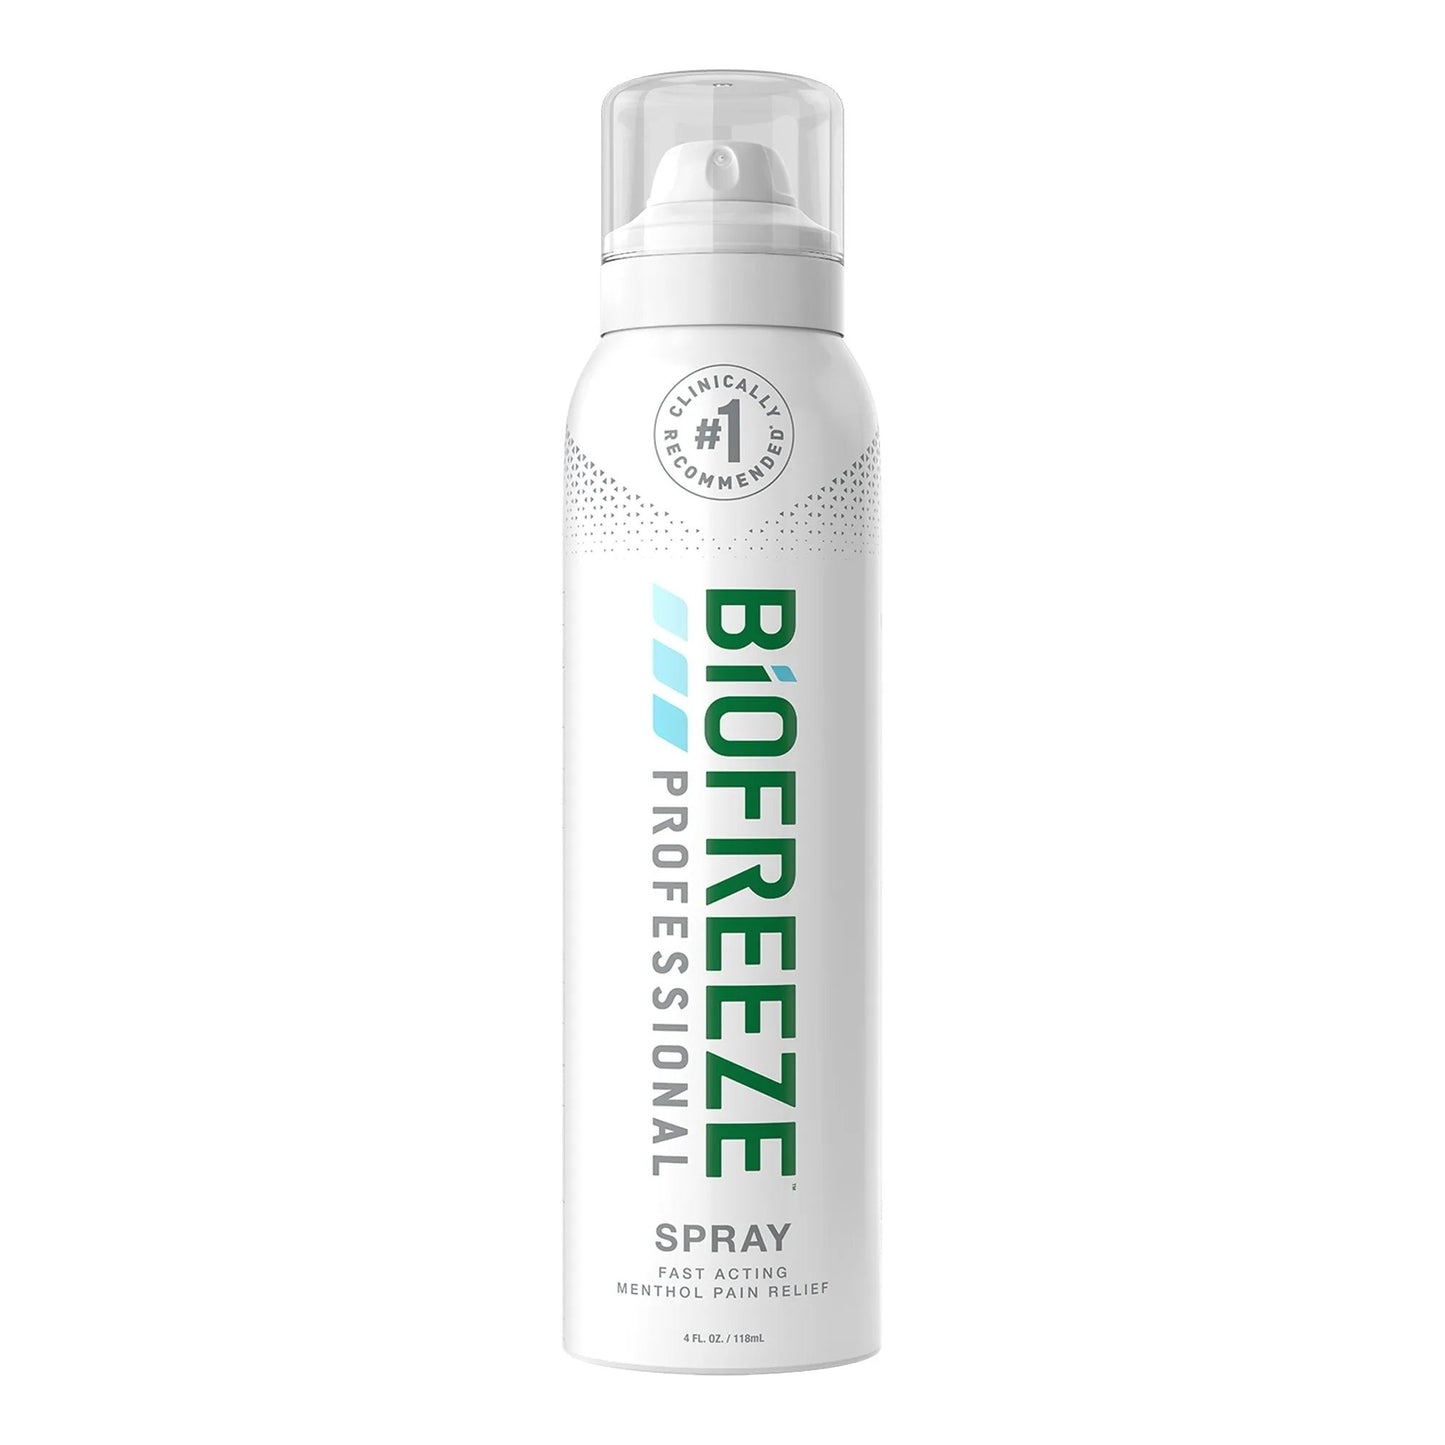 Biofreeze Professional 360° Menthol Topical Pain Relief, 4 oz. Spray